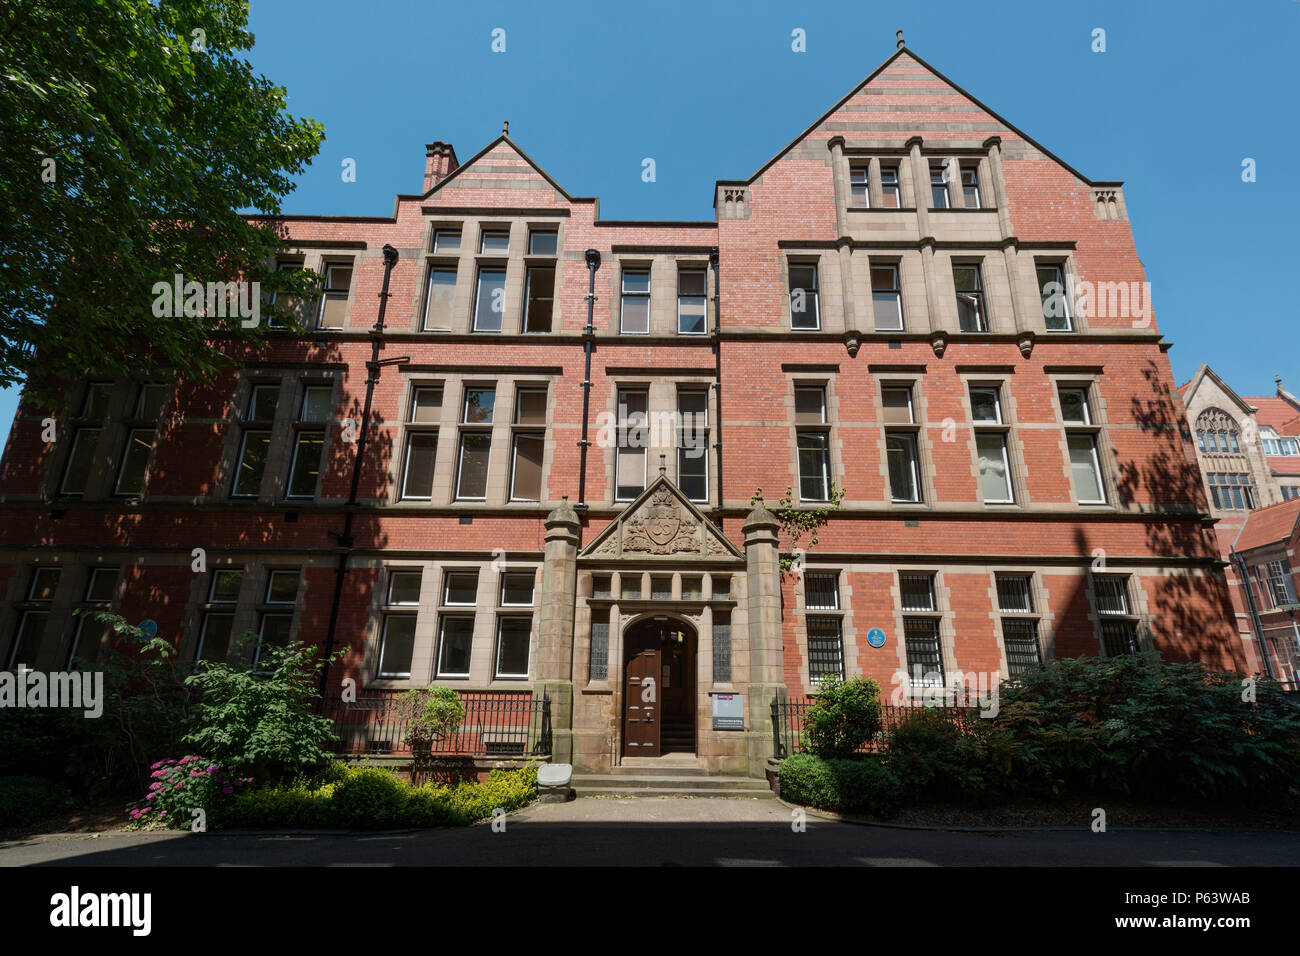 The Rutherford Building at Manchester University, where the atom was first split in 1917 following a nuclear reaction (Editorial use only). Stock Photo